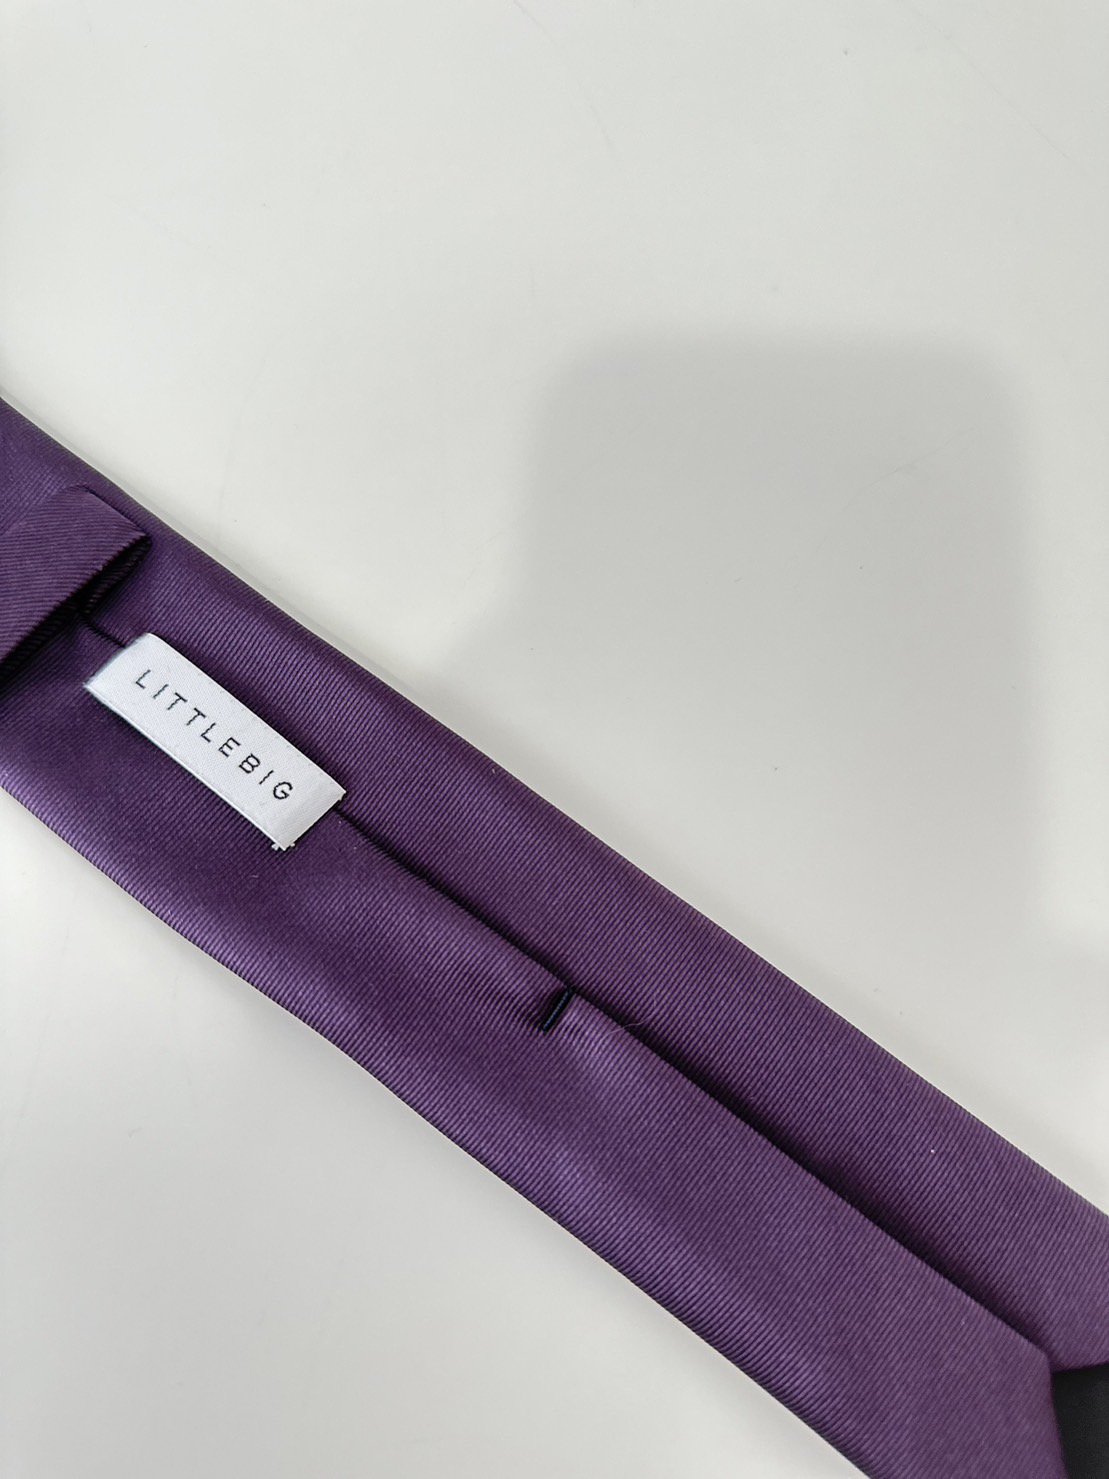 LITTLEBIG<br />[30%off] Narrow Tie / Purple<img class='new_mark_img2' src='https://img.shop-pro.jp/img/new/icons20.gif' style='border:none;display:inline;margin:0px;padding:0px;width:auto;' />